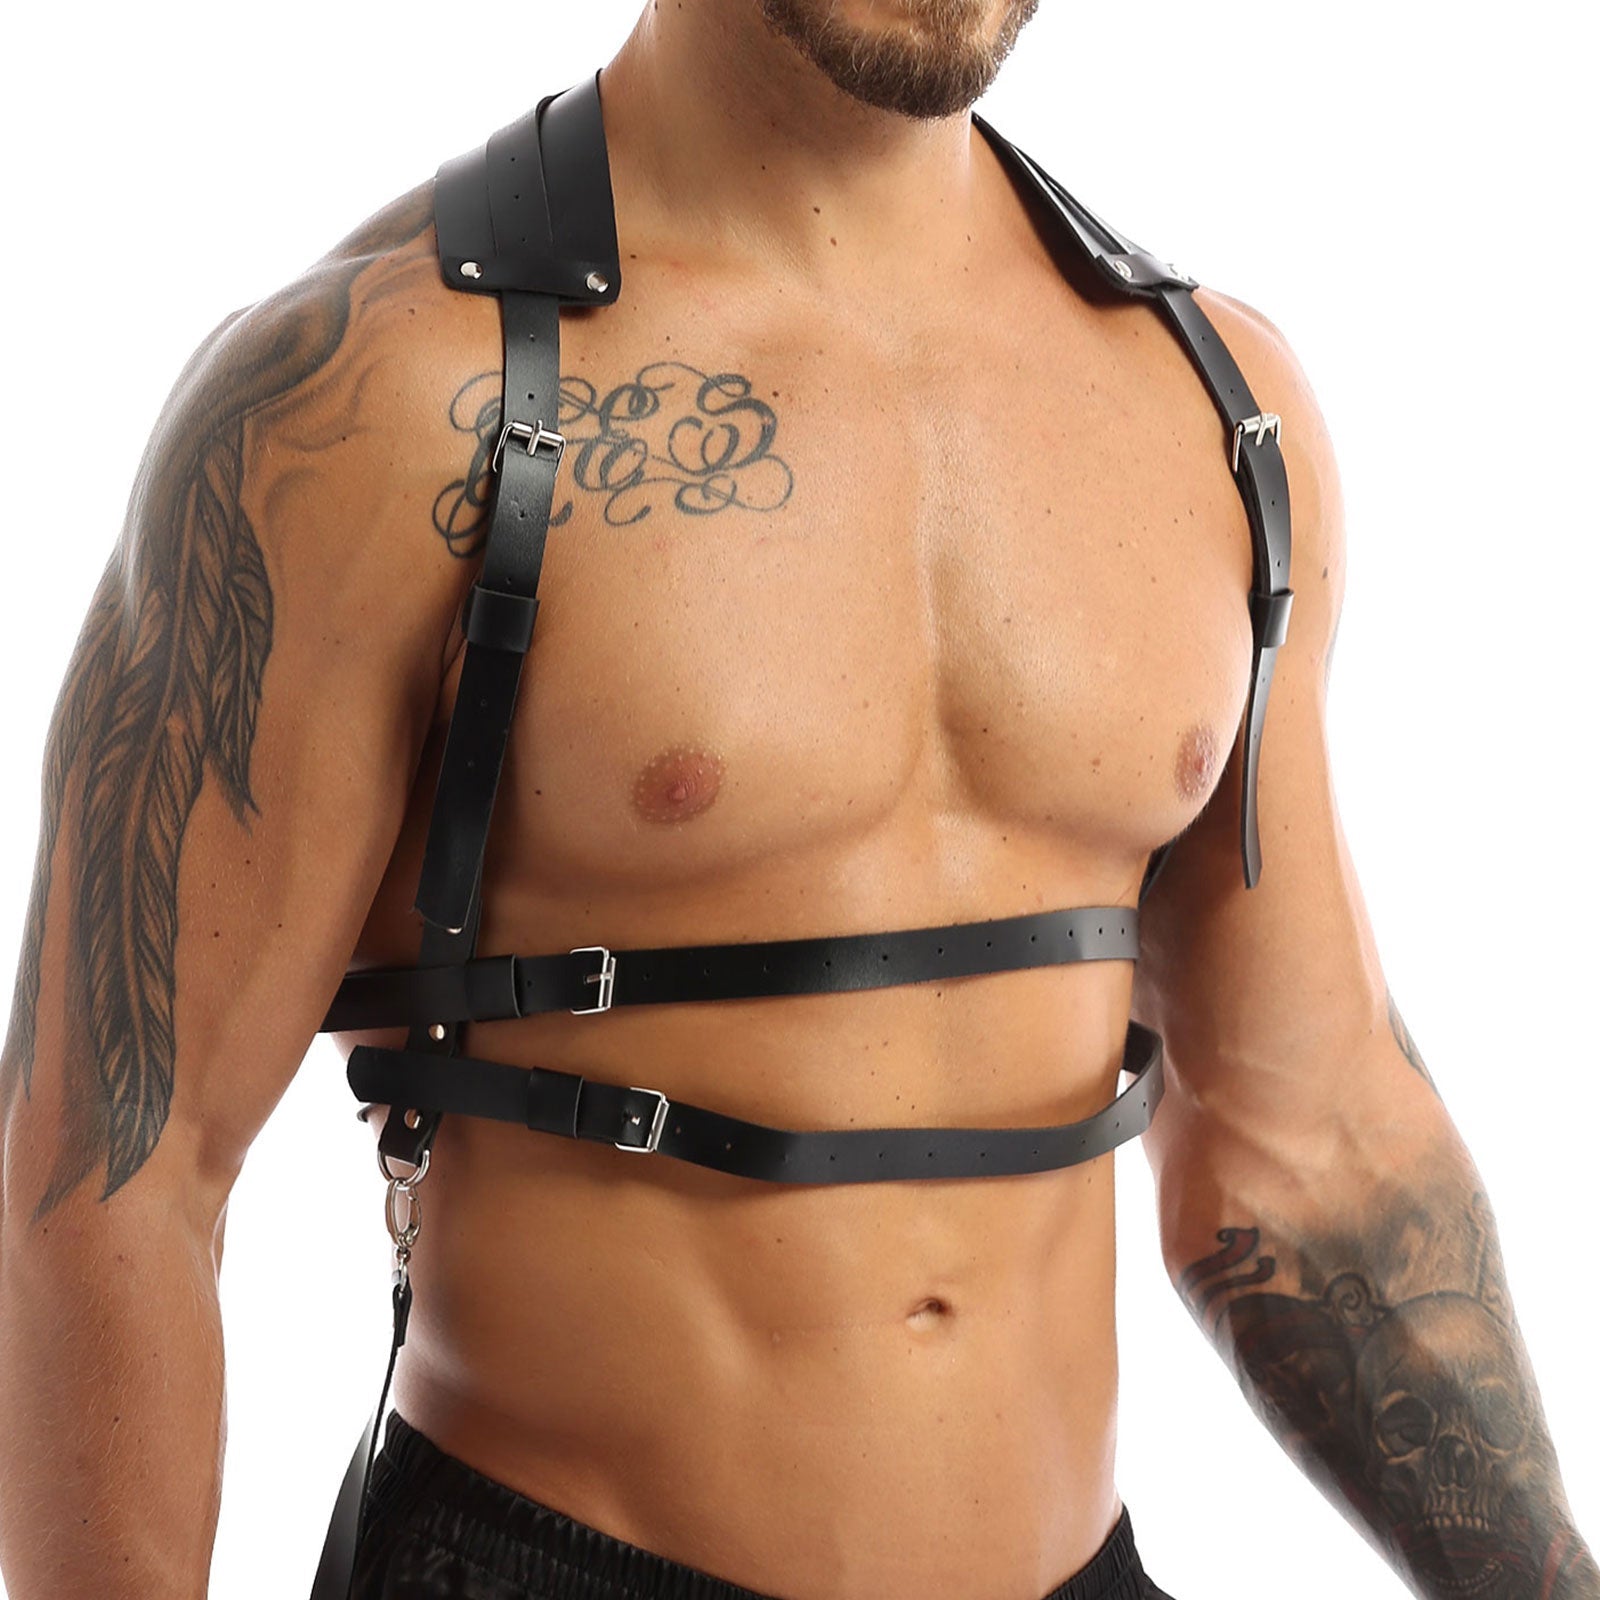 Male Body Harness / Faux Leather Body Chest Harness Costumes with O-rings Buttons / Gothic Bondage - HARD'N'HEAVY